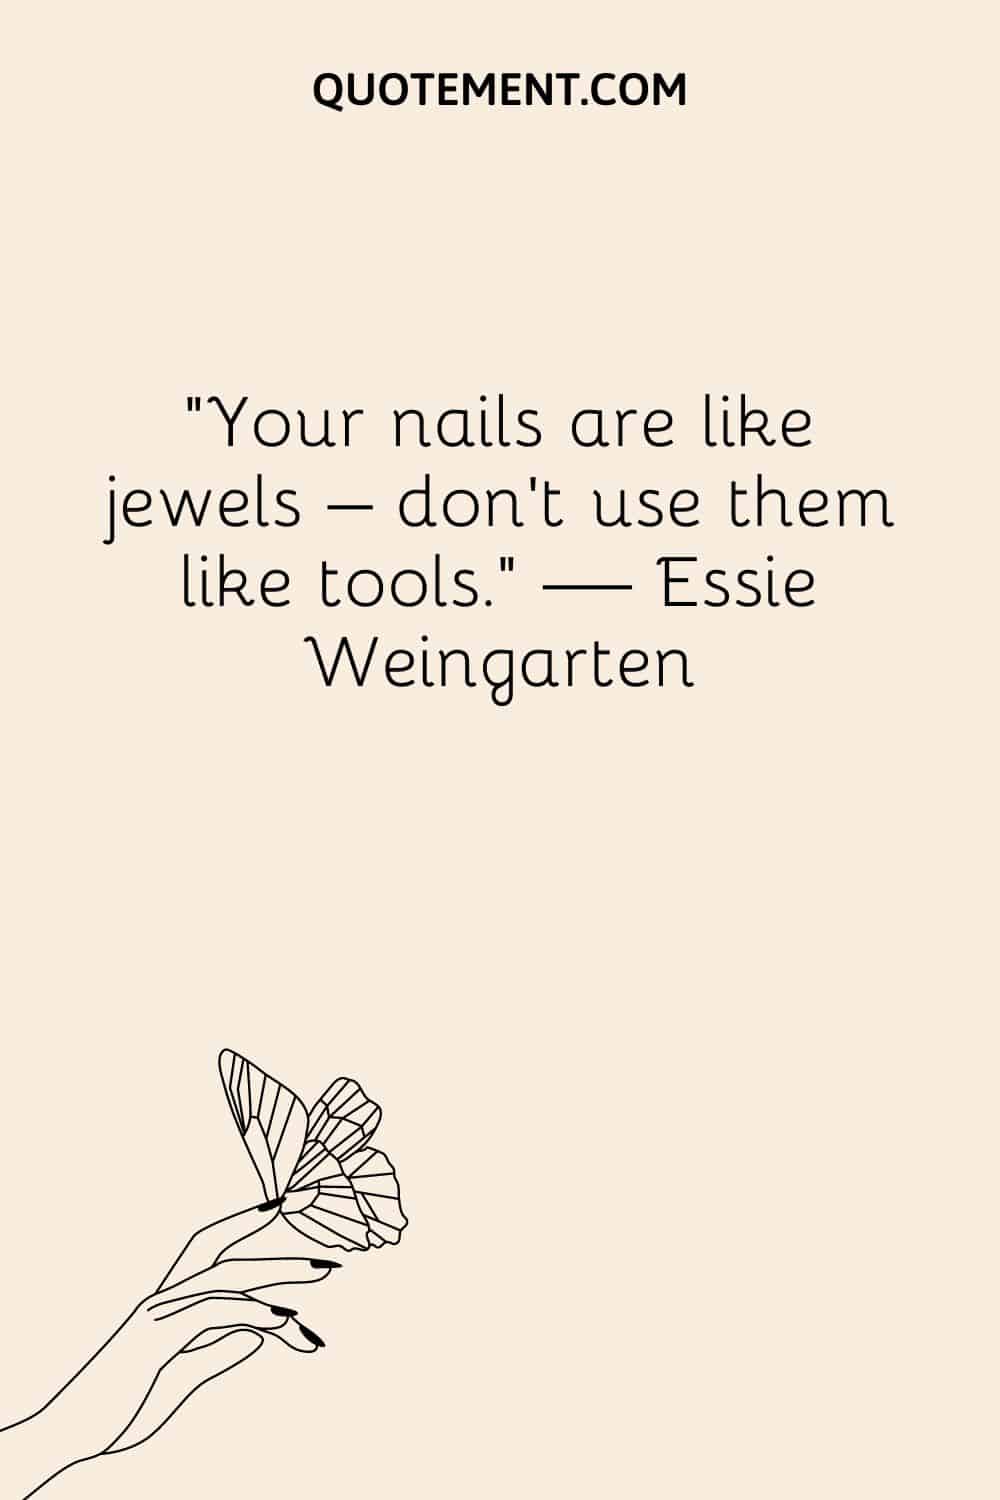 Your nails are like jewels – don’t use them like tools.